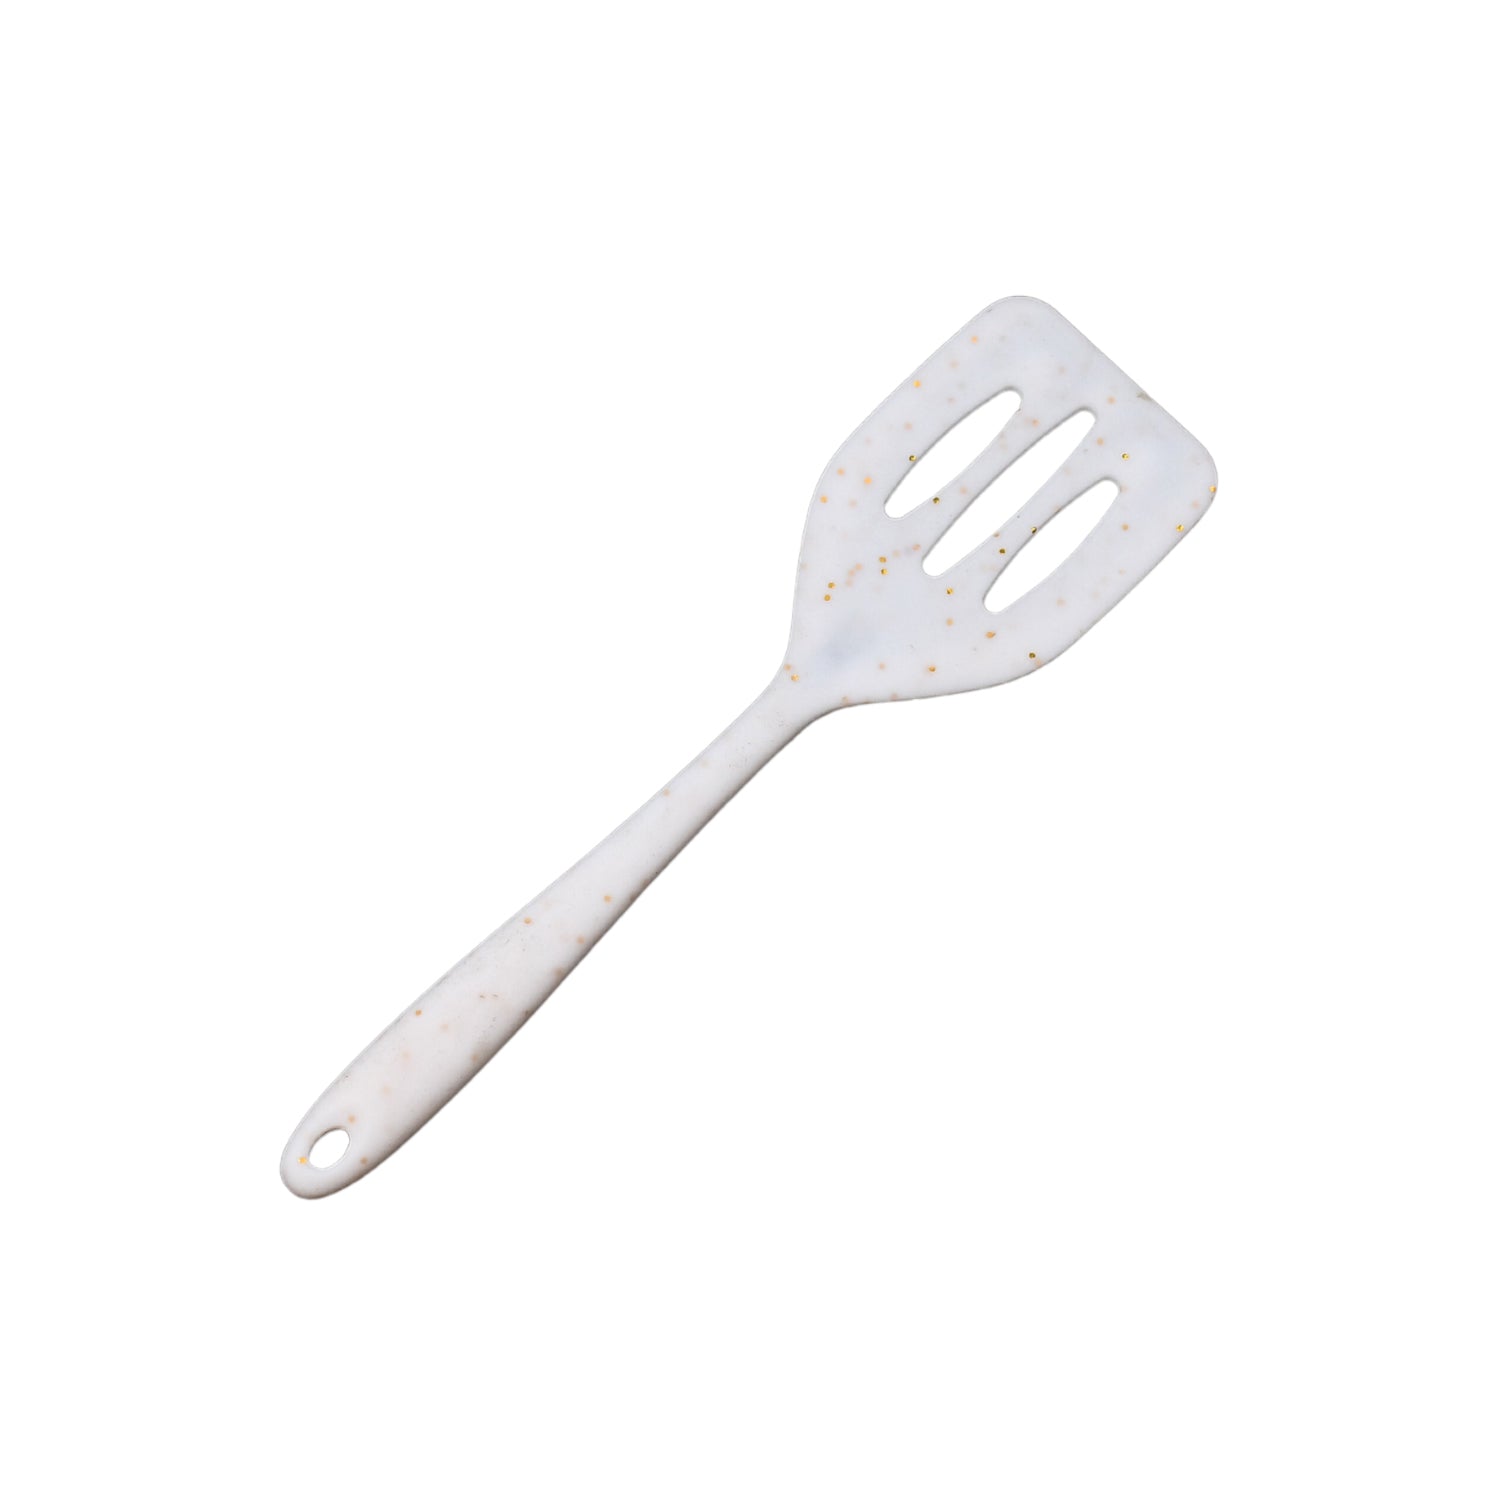 5422 Silicone Turner Spatula/Slotted Spatula High Heat Resistant to 480°F, Hygienic One Piece Design, Non Stick Kitchen Utensil for Fish, Eggs, Pancakes (21cm) DeoDap